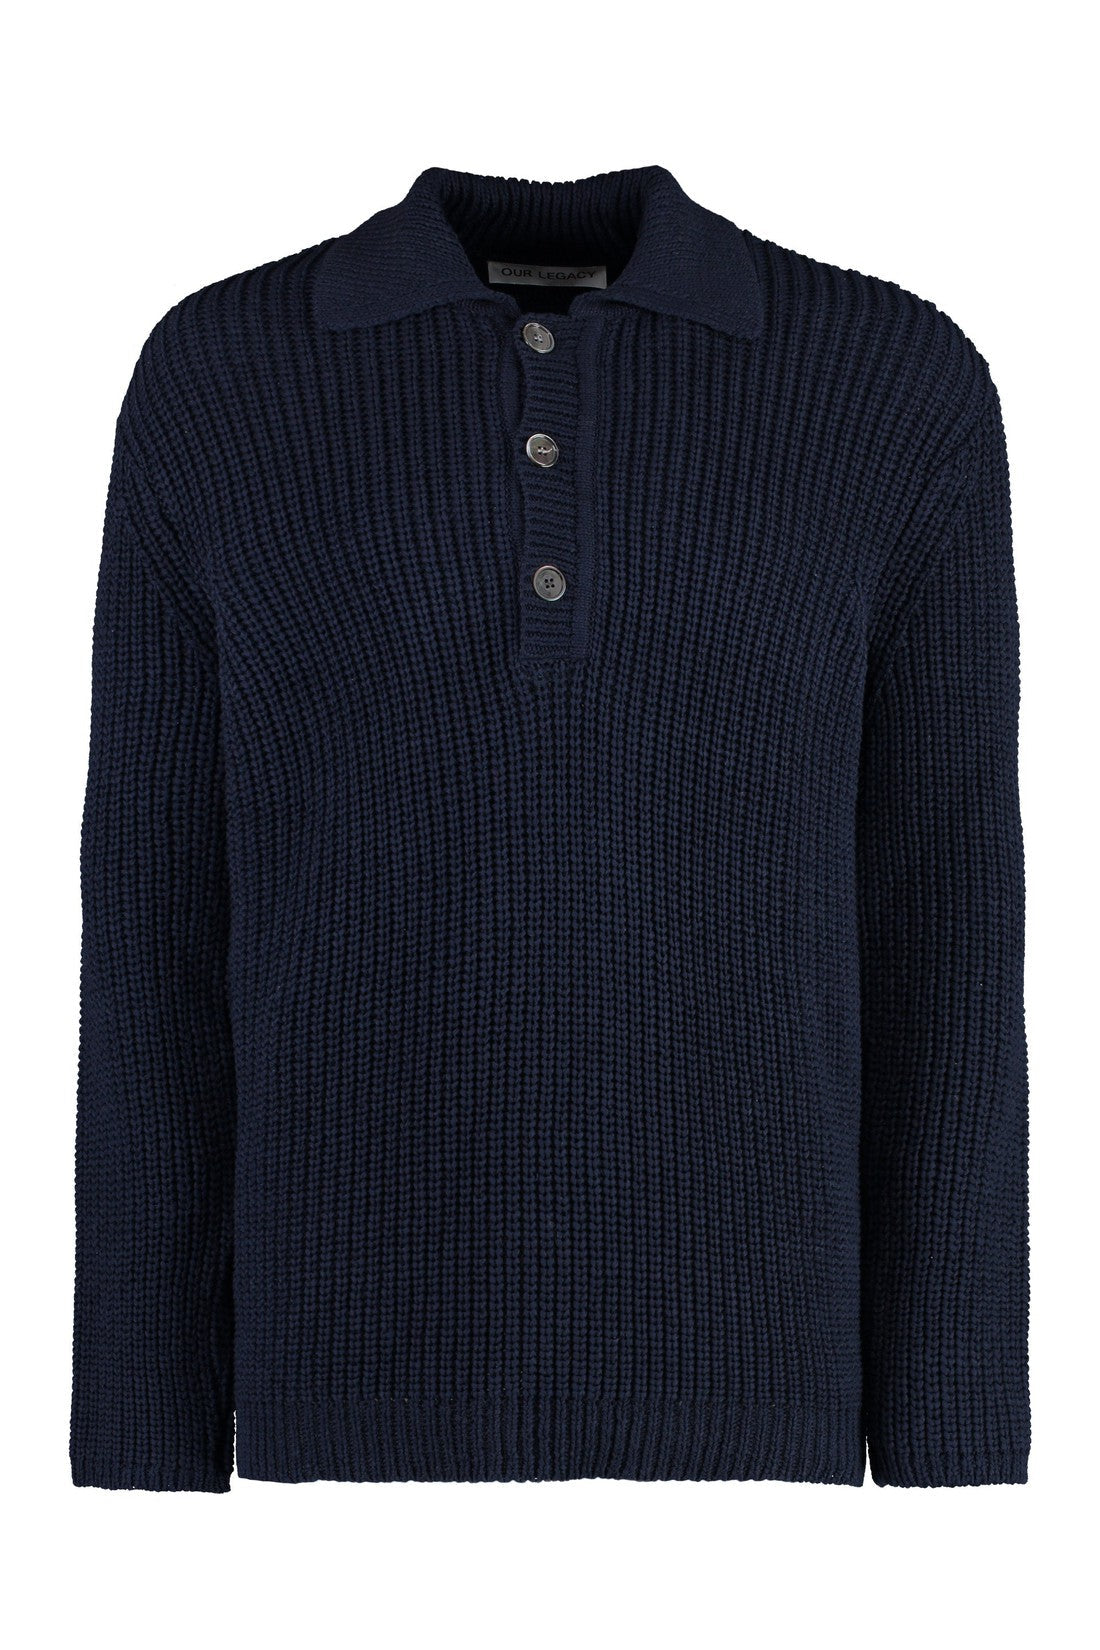 Our Legacy-OUTLET-SALE-Knitted cotton polo shirt-ARCHIVIST